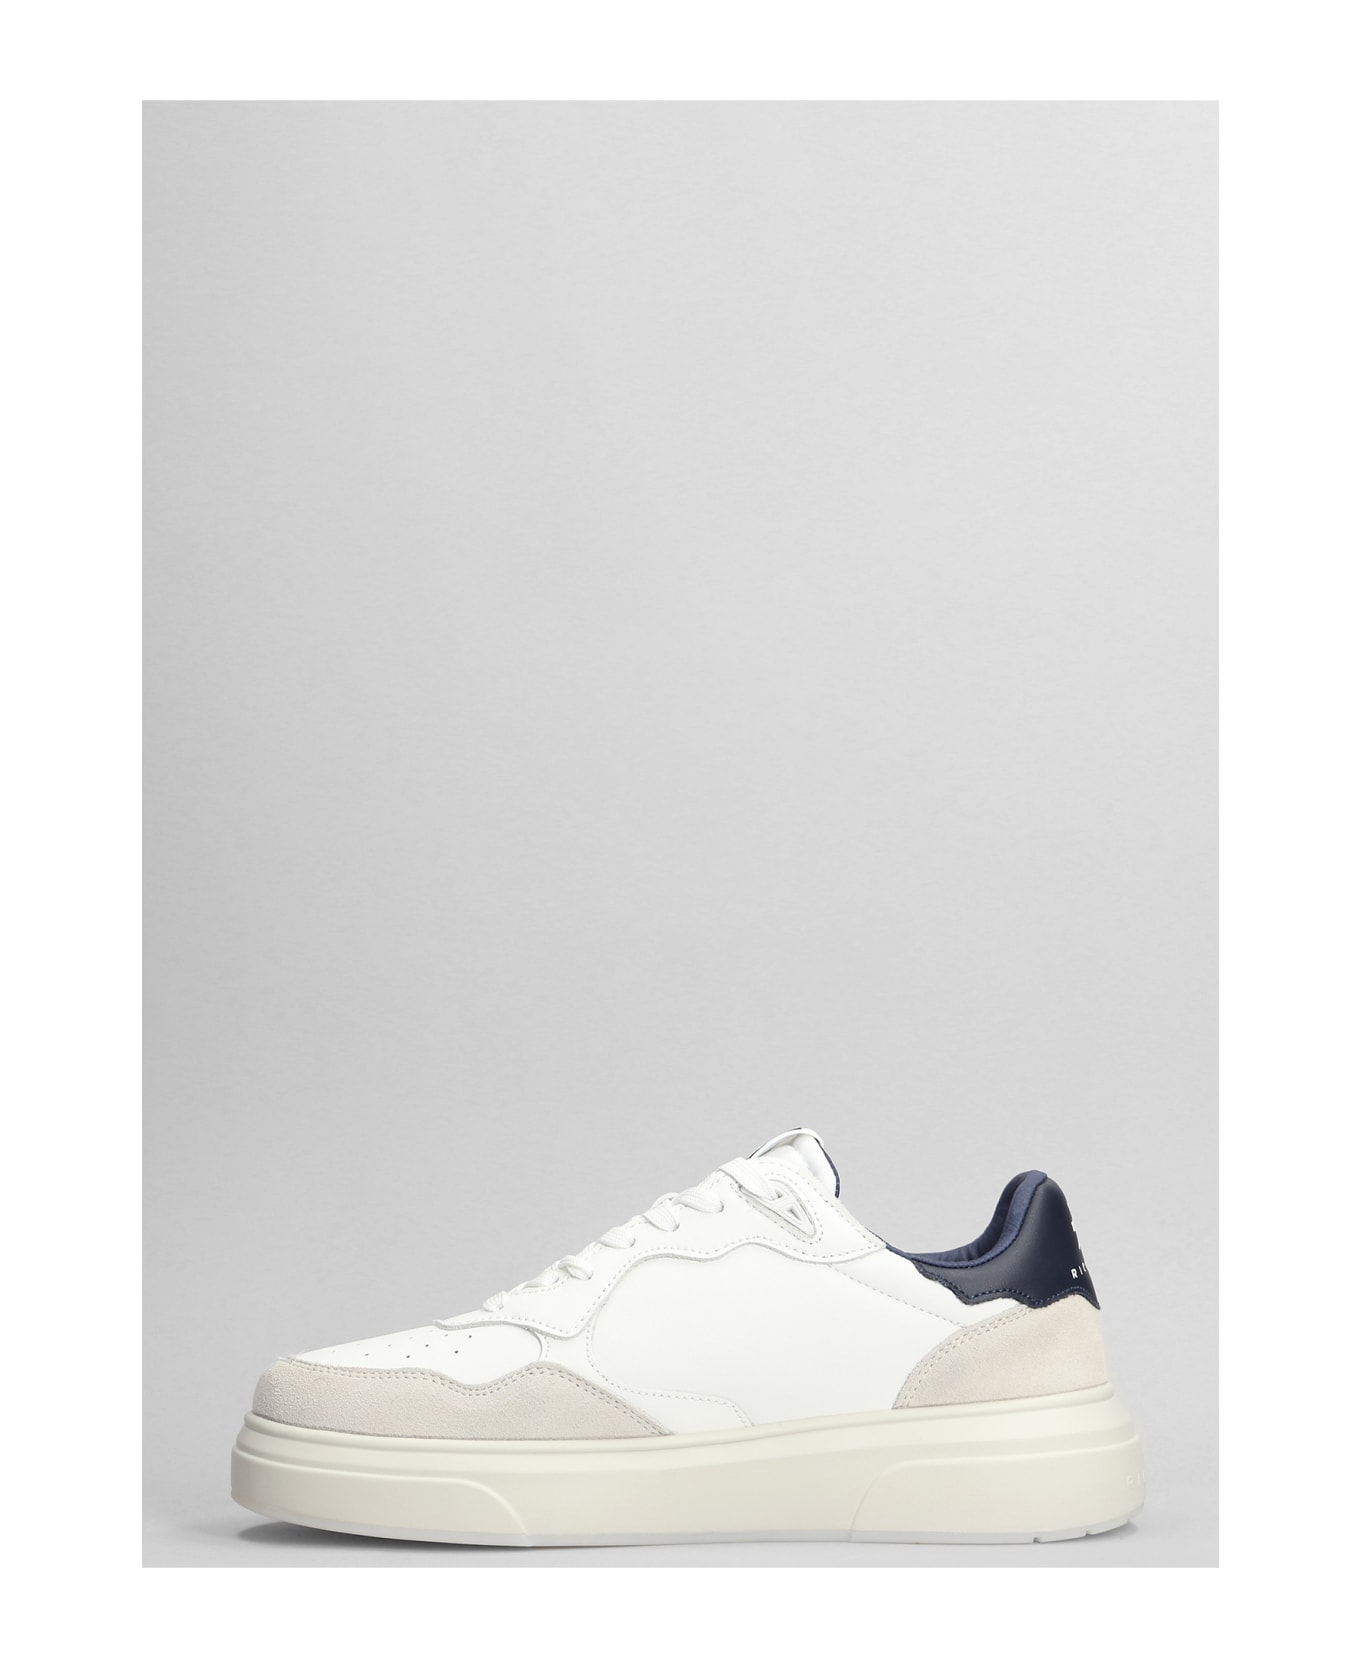 John Richmond Sneakers In White Suede And Leather - white